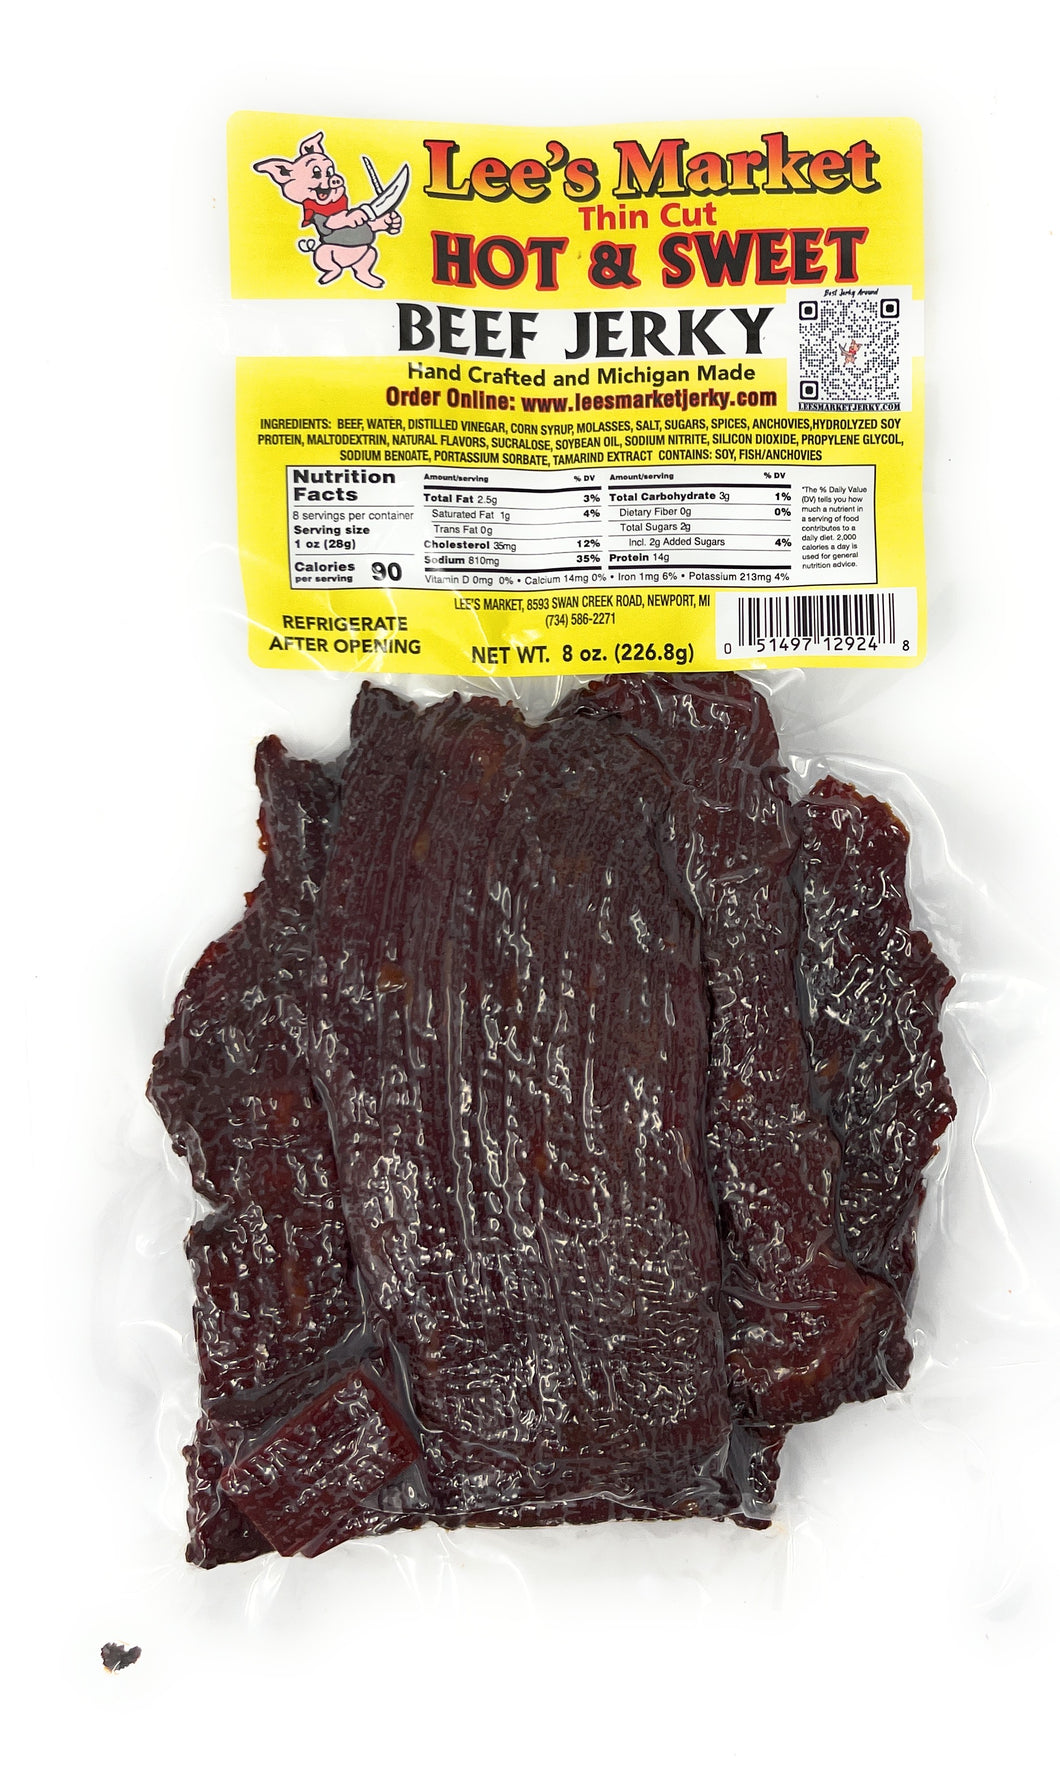 Package of Hot and Sweet Thin Cut Beef Jerky